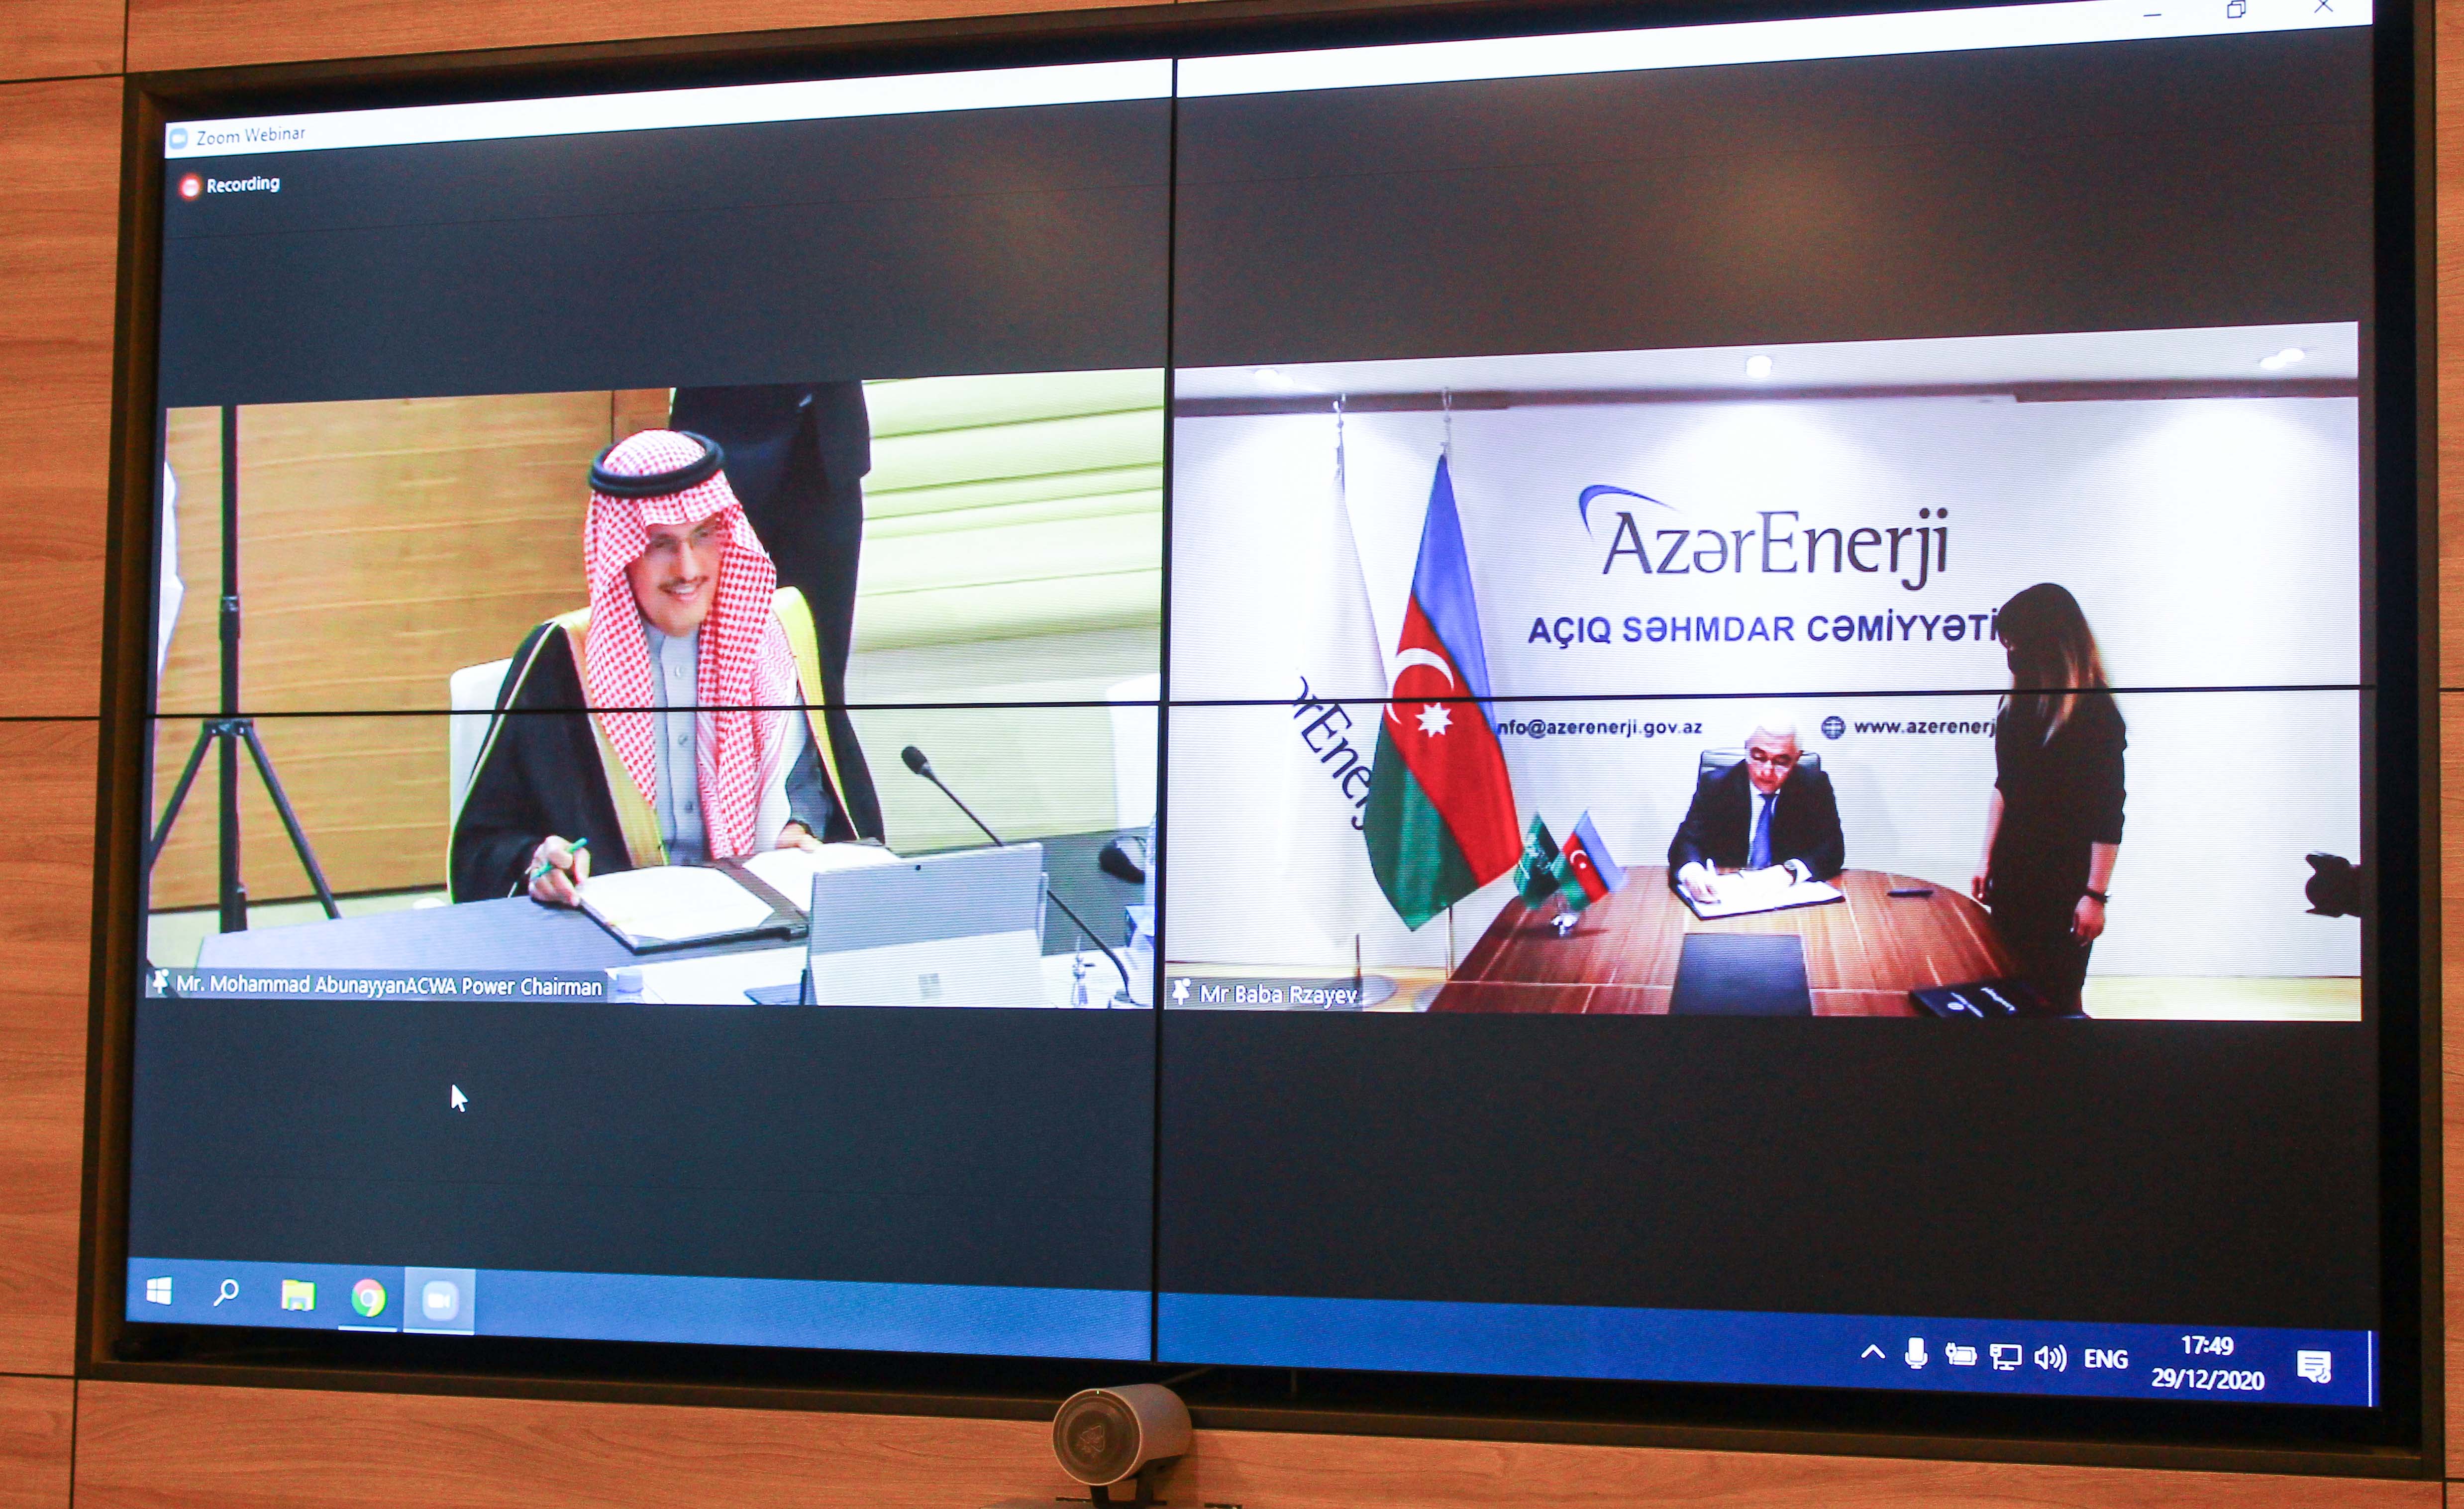 Agreements on wind power plant project with capacity of 240 MW were signed with "Acwa Power" Company